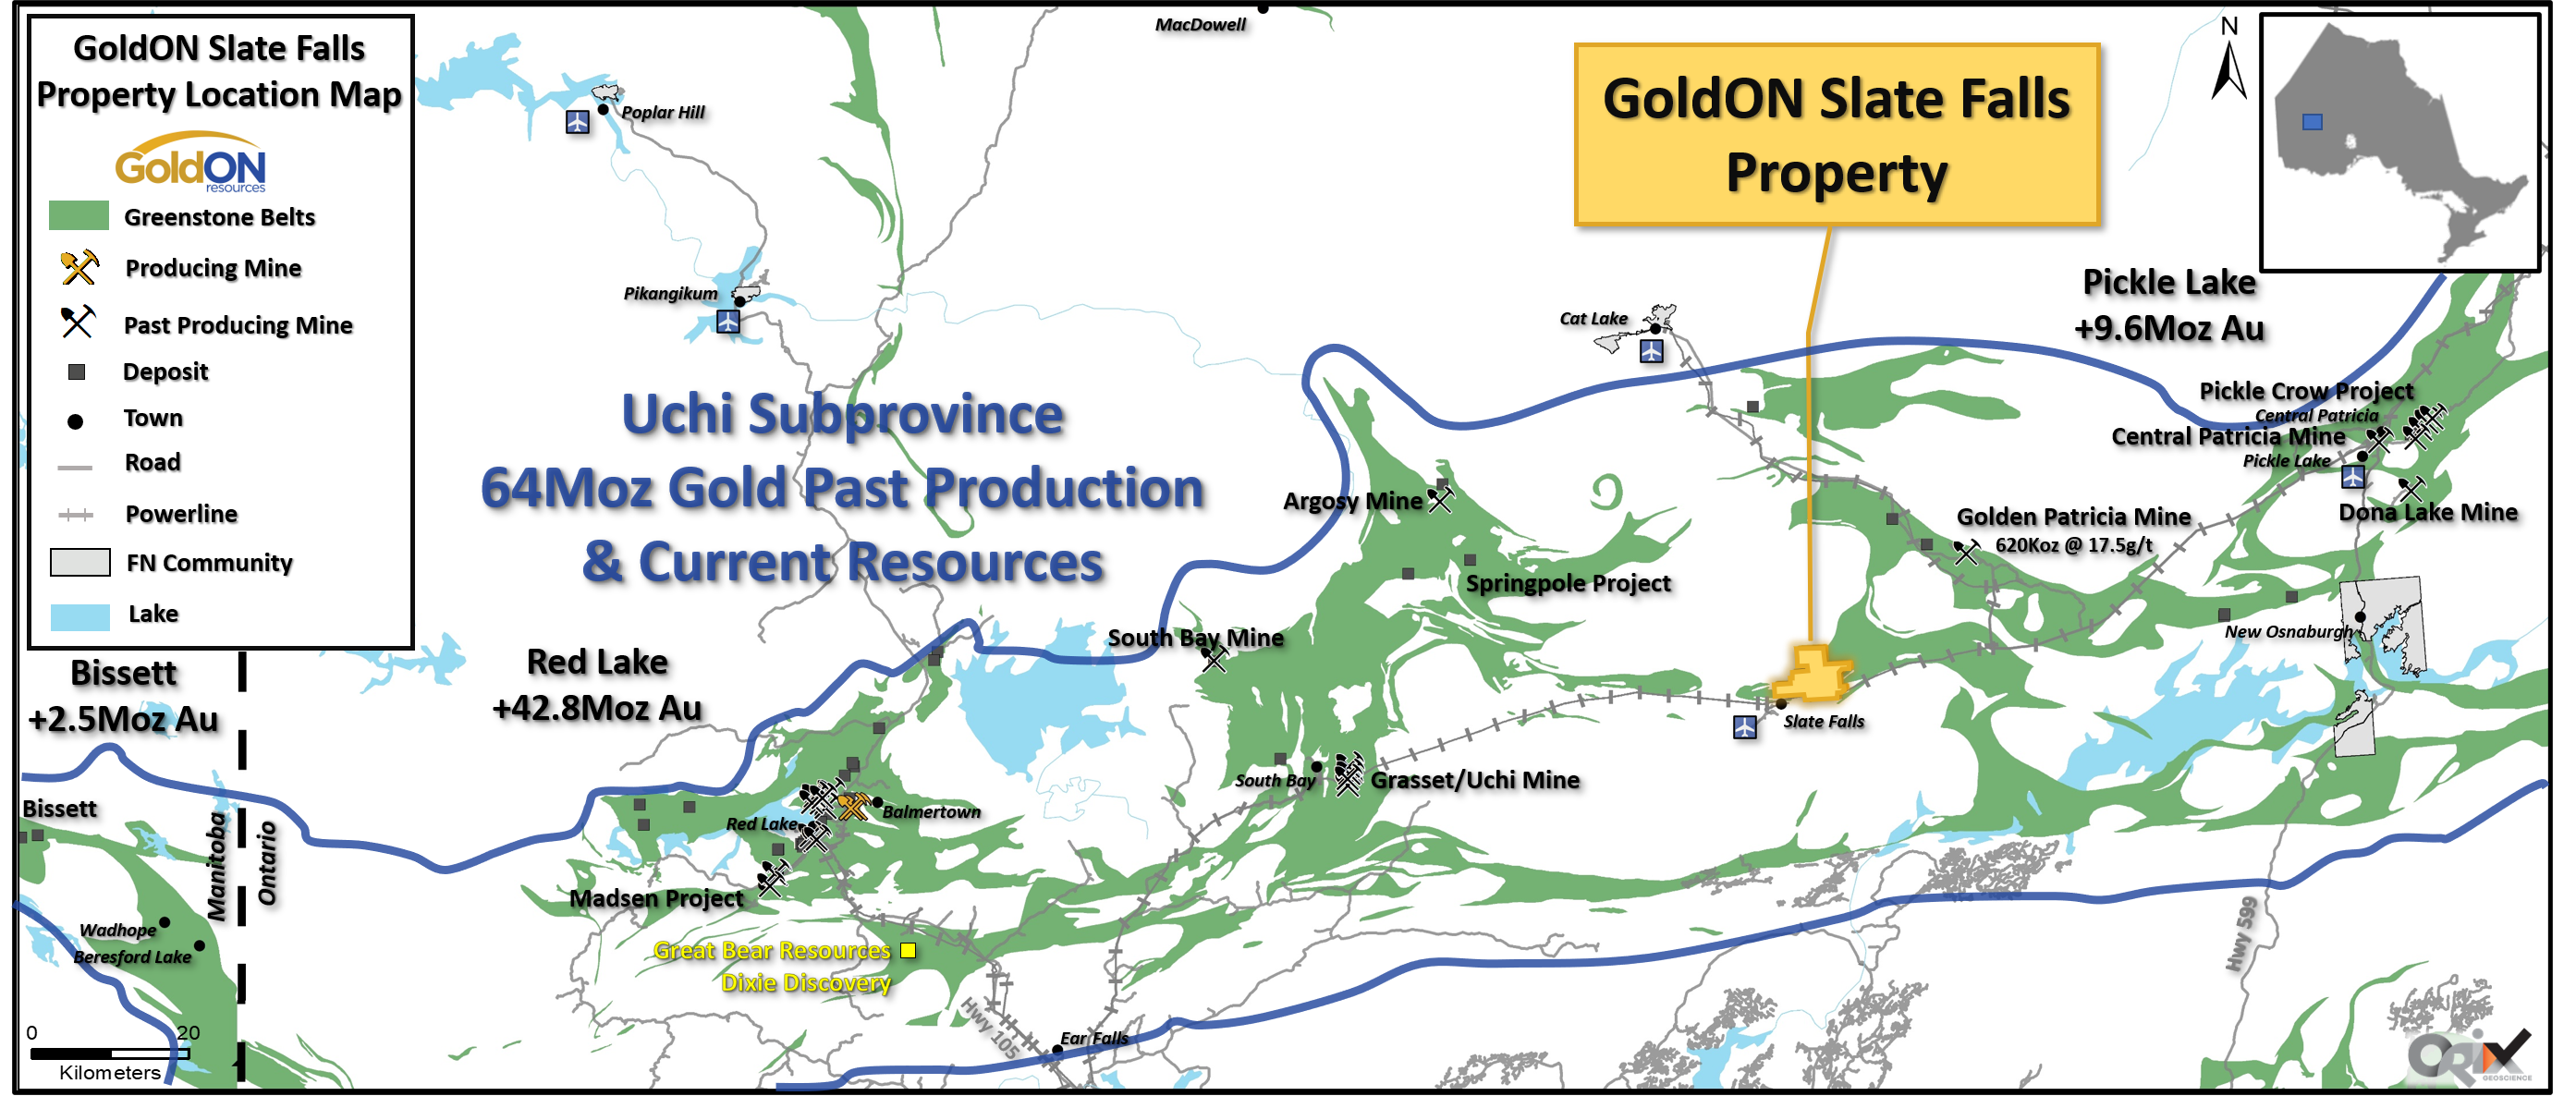 GoldON Resources Ltd., Tuesday, August 18, 2020, Press release picture